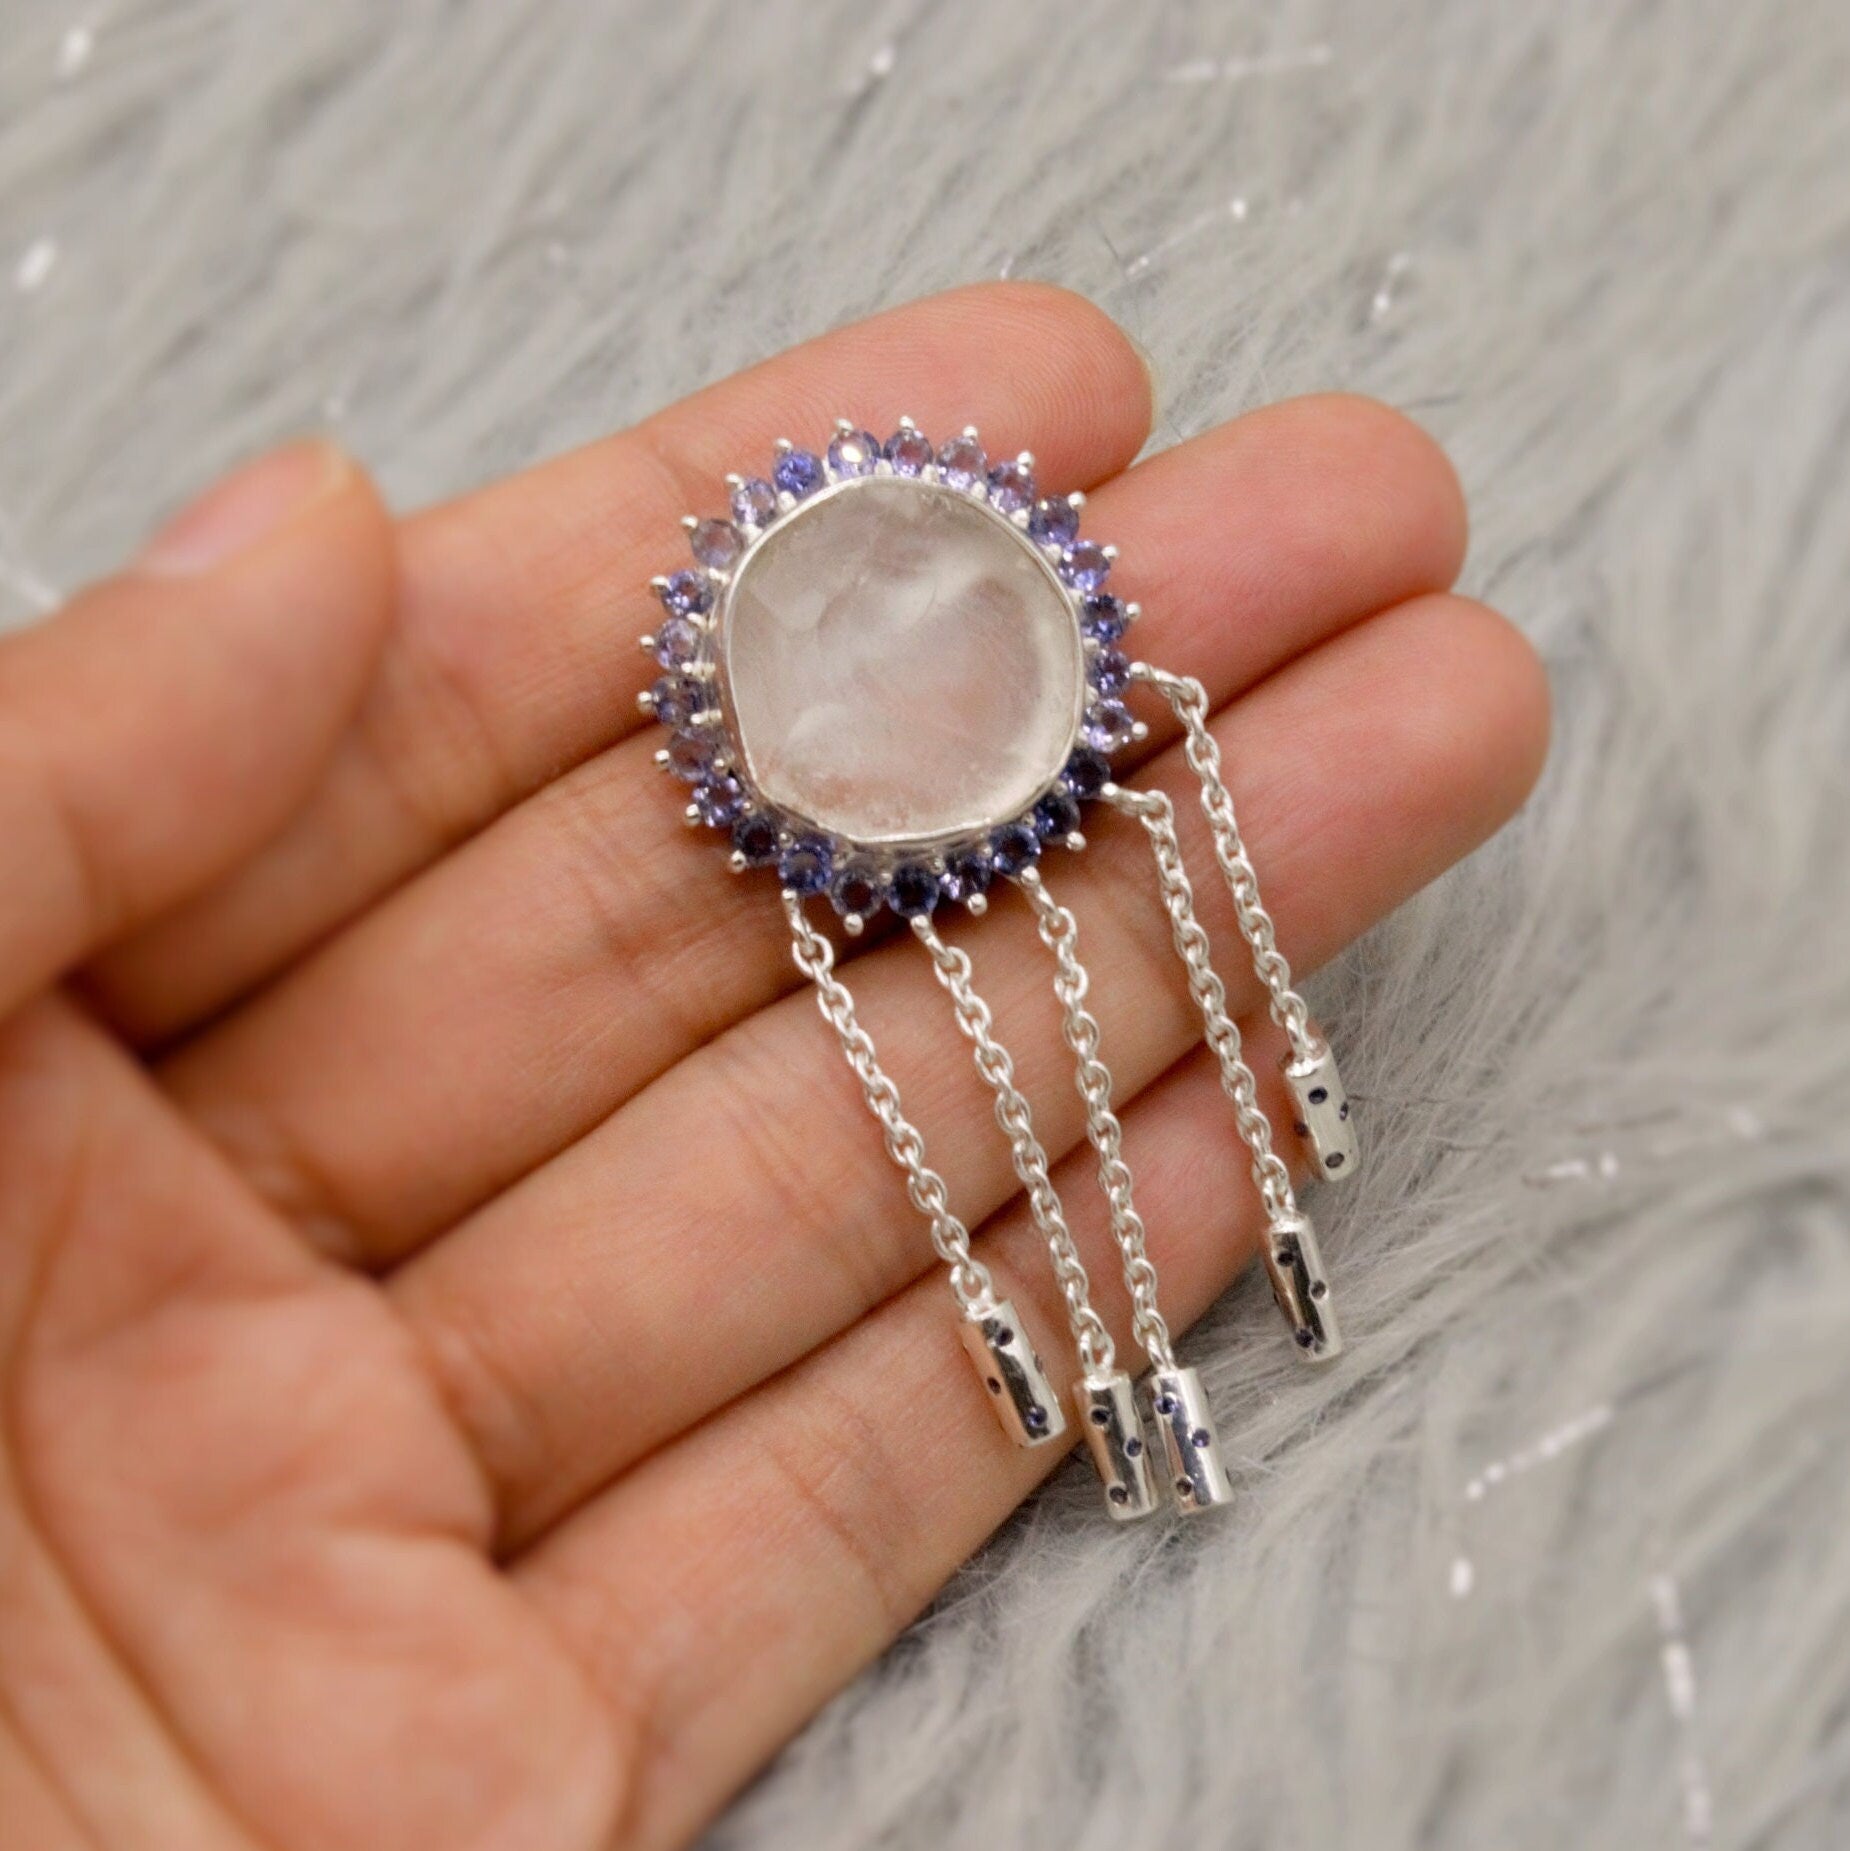 Iolite, Clear Quartz Silver Drop Earrings, Clear Quartz Crystal, Unique Statement Gemstone Jhumka Earrings Bridesmaid Gifts for Her